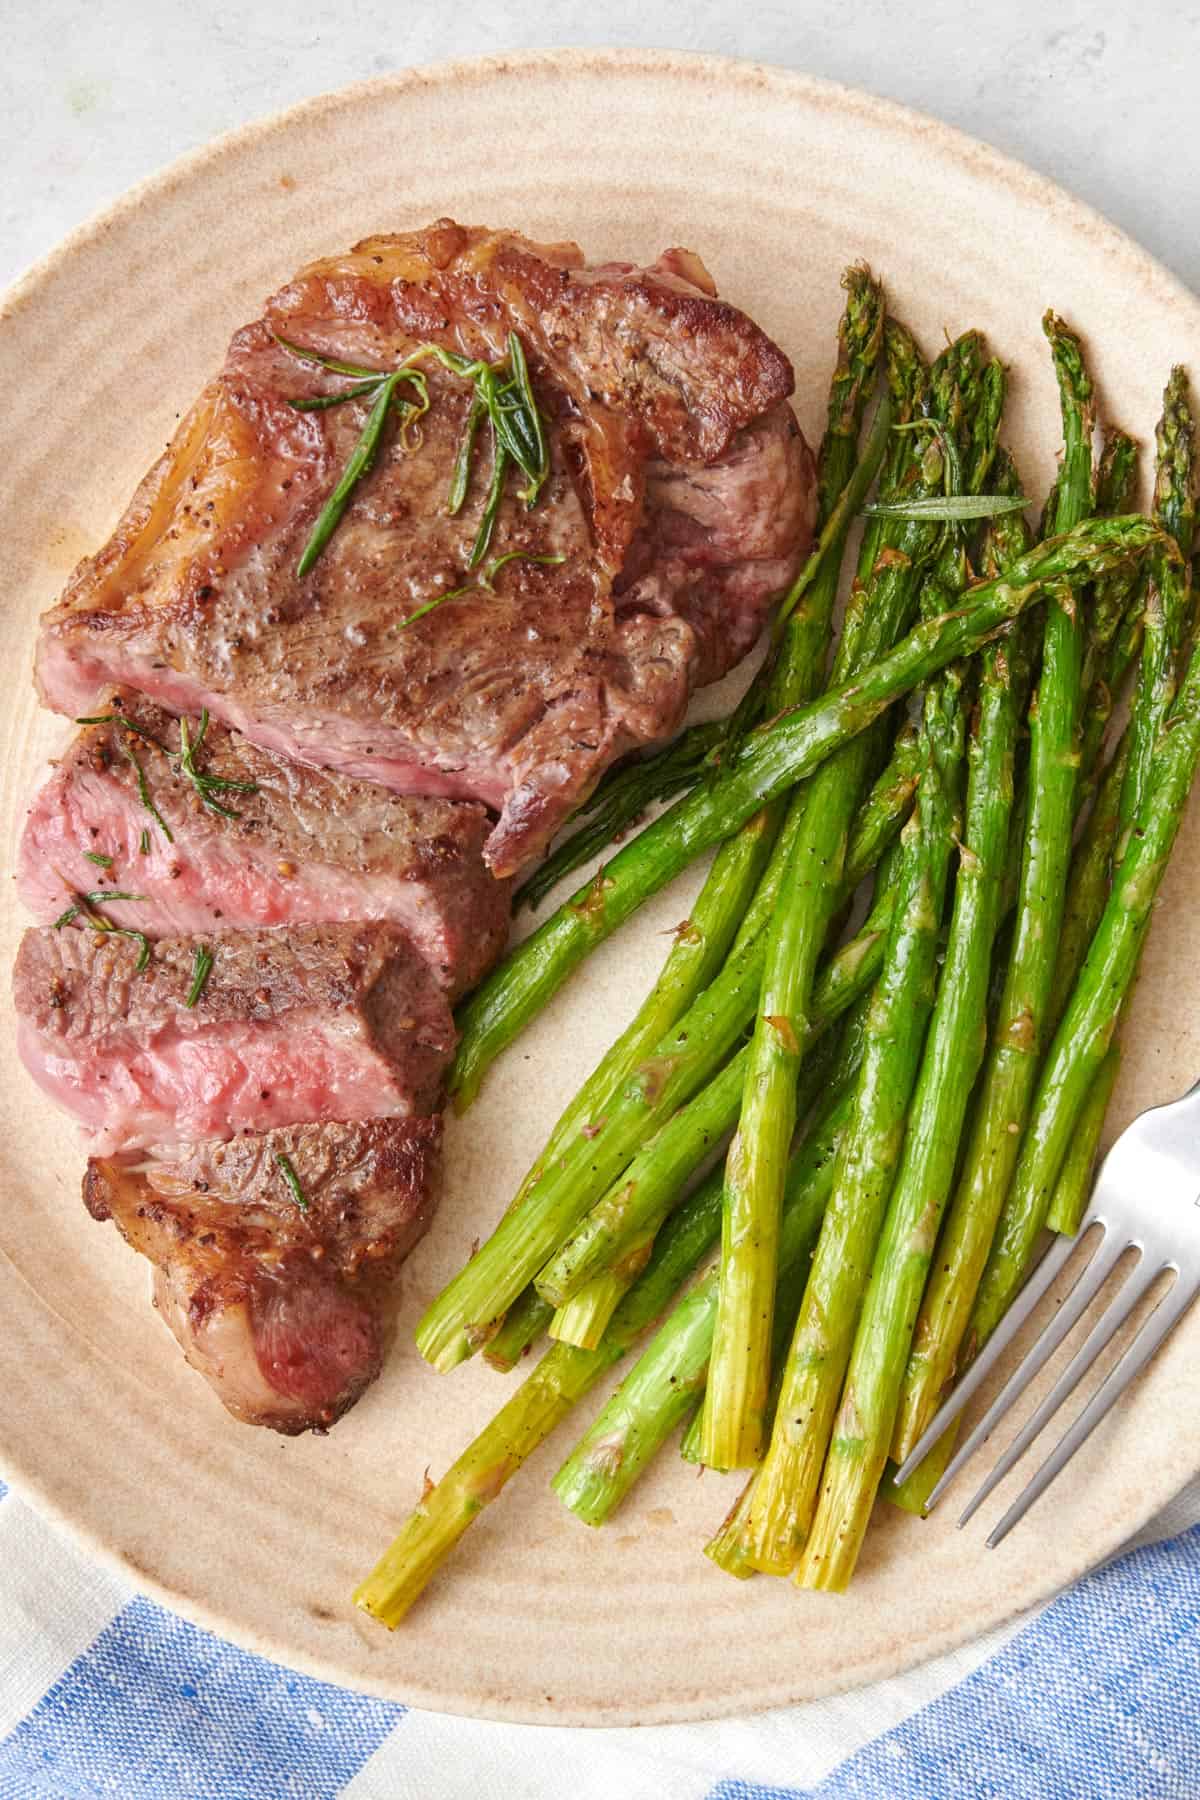 Sliced pan-seared steak on a plate with a side of cooked asparagus.